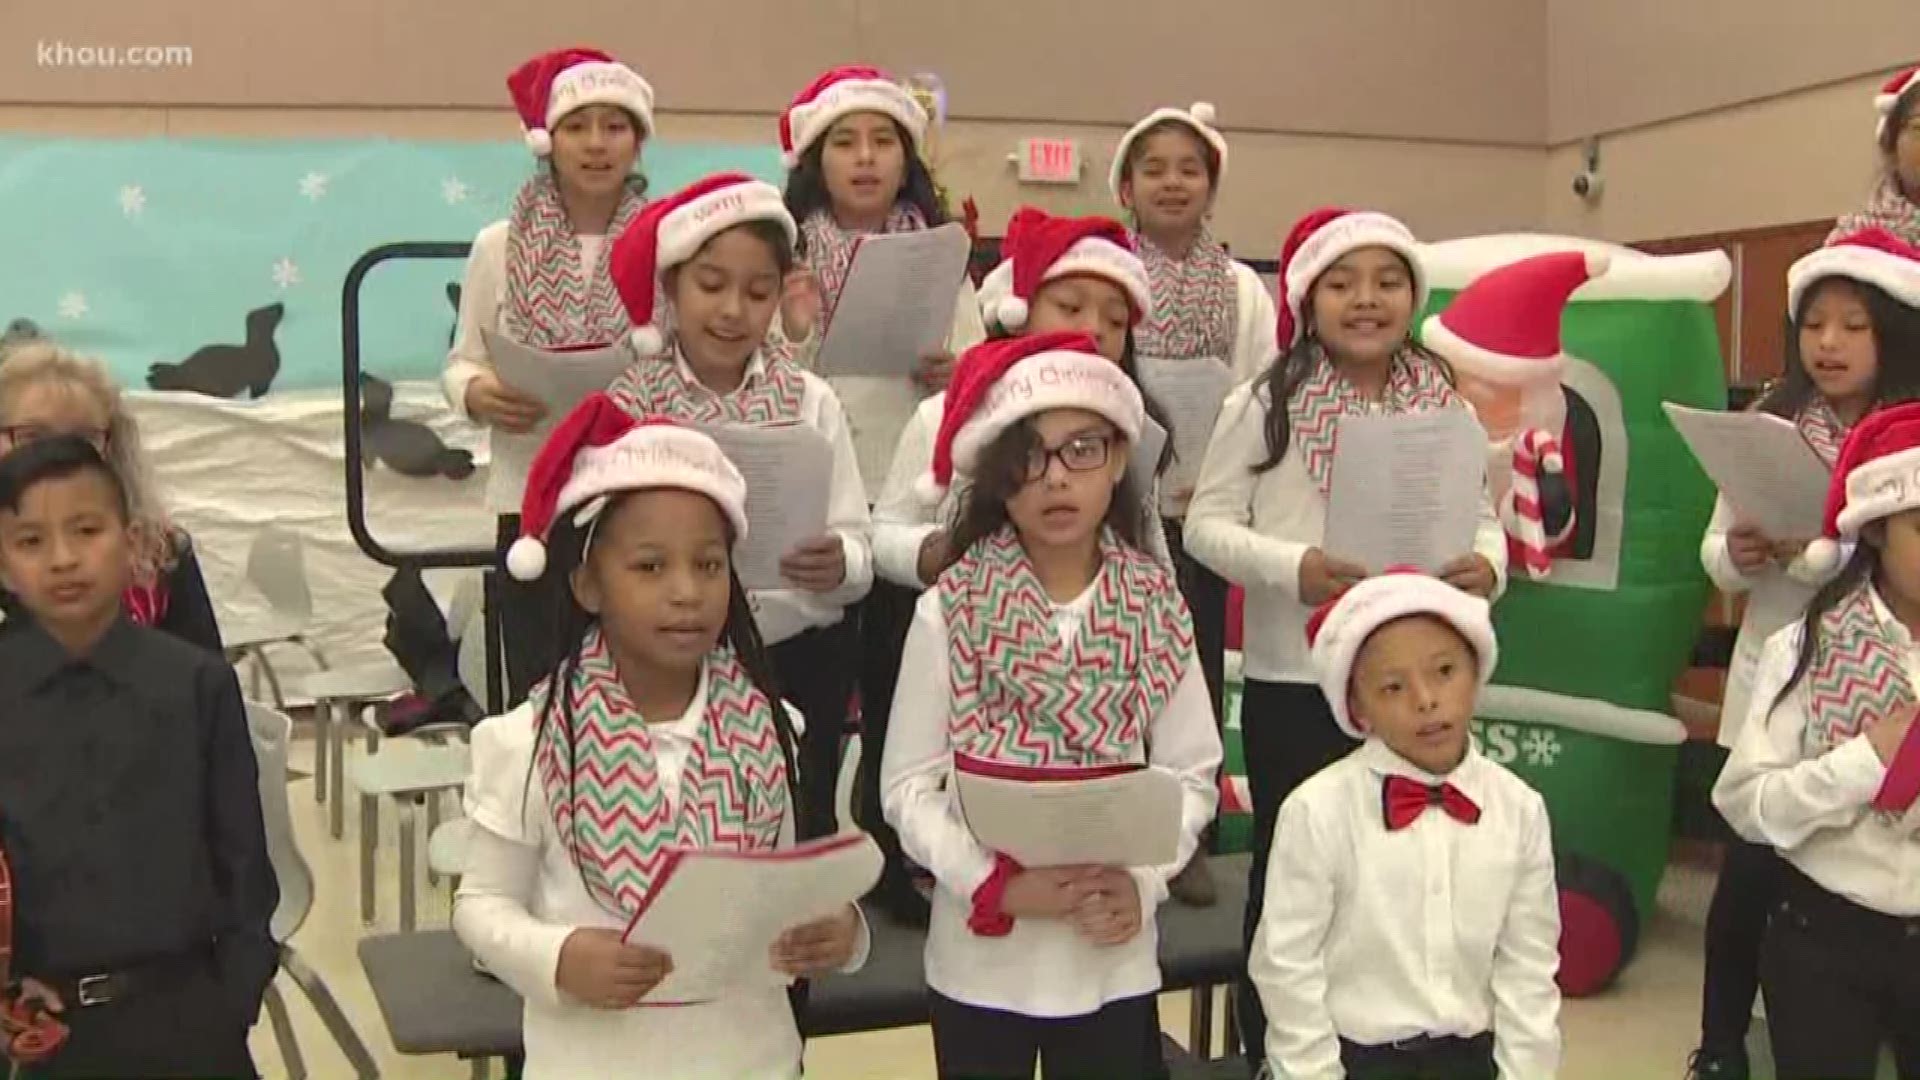 Kids have one more week in school before winter break, and they're already in the holiday spirit.